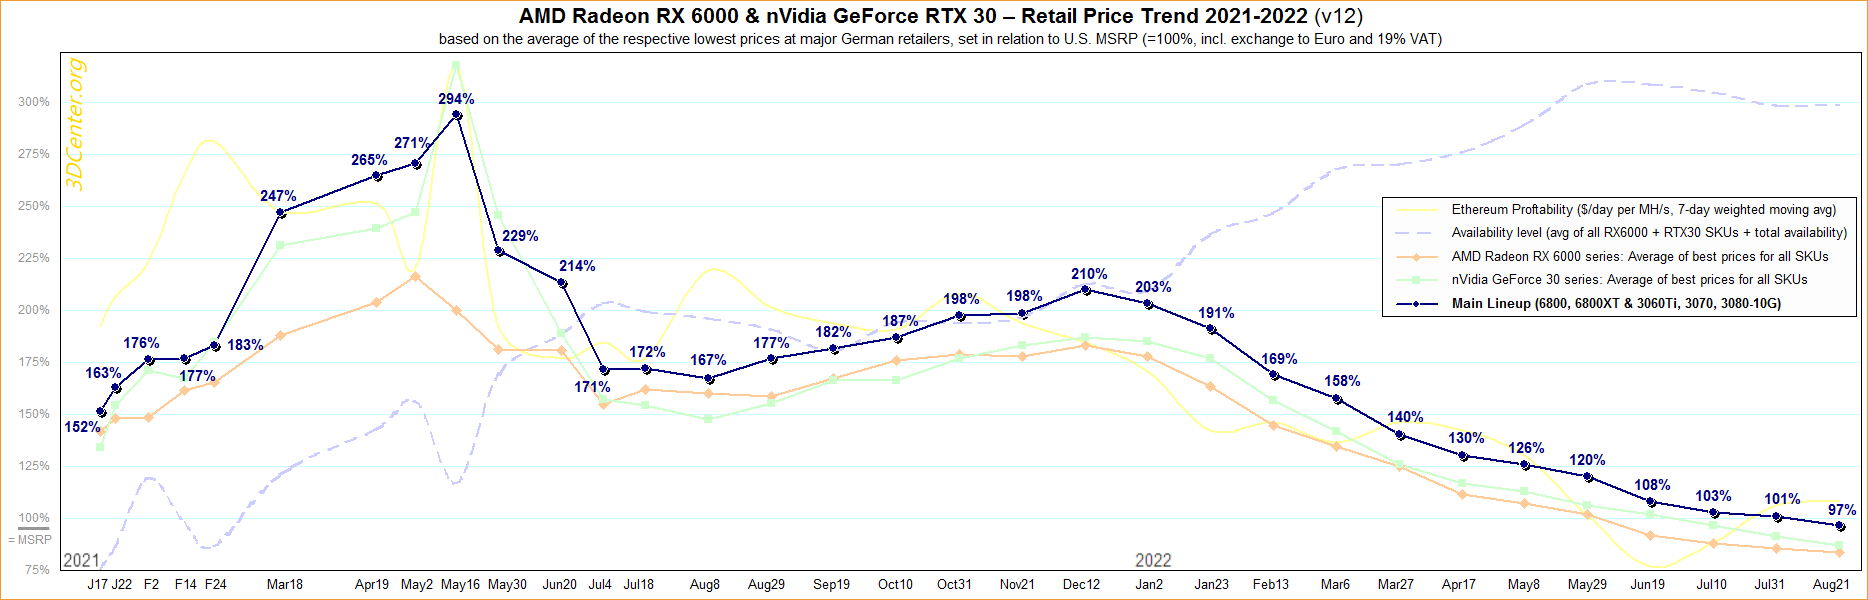 AMD and nVidia Retail Price Trend 2021-2022.